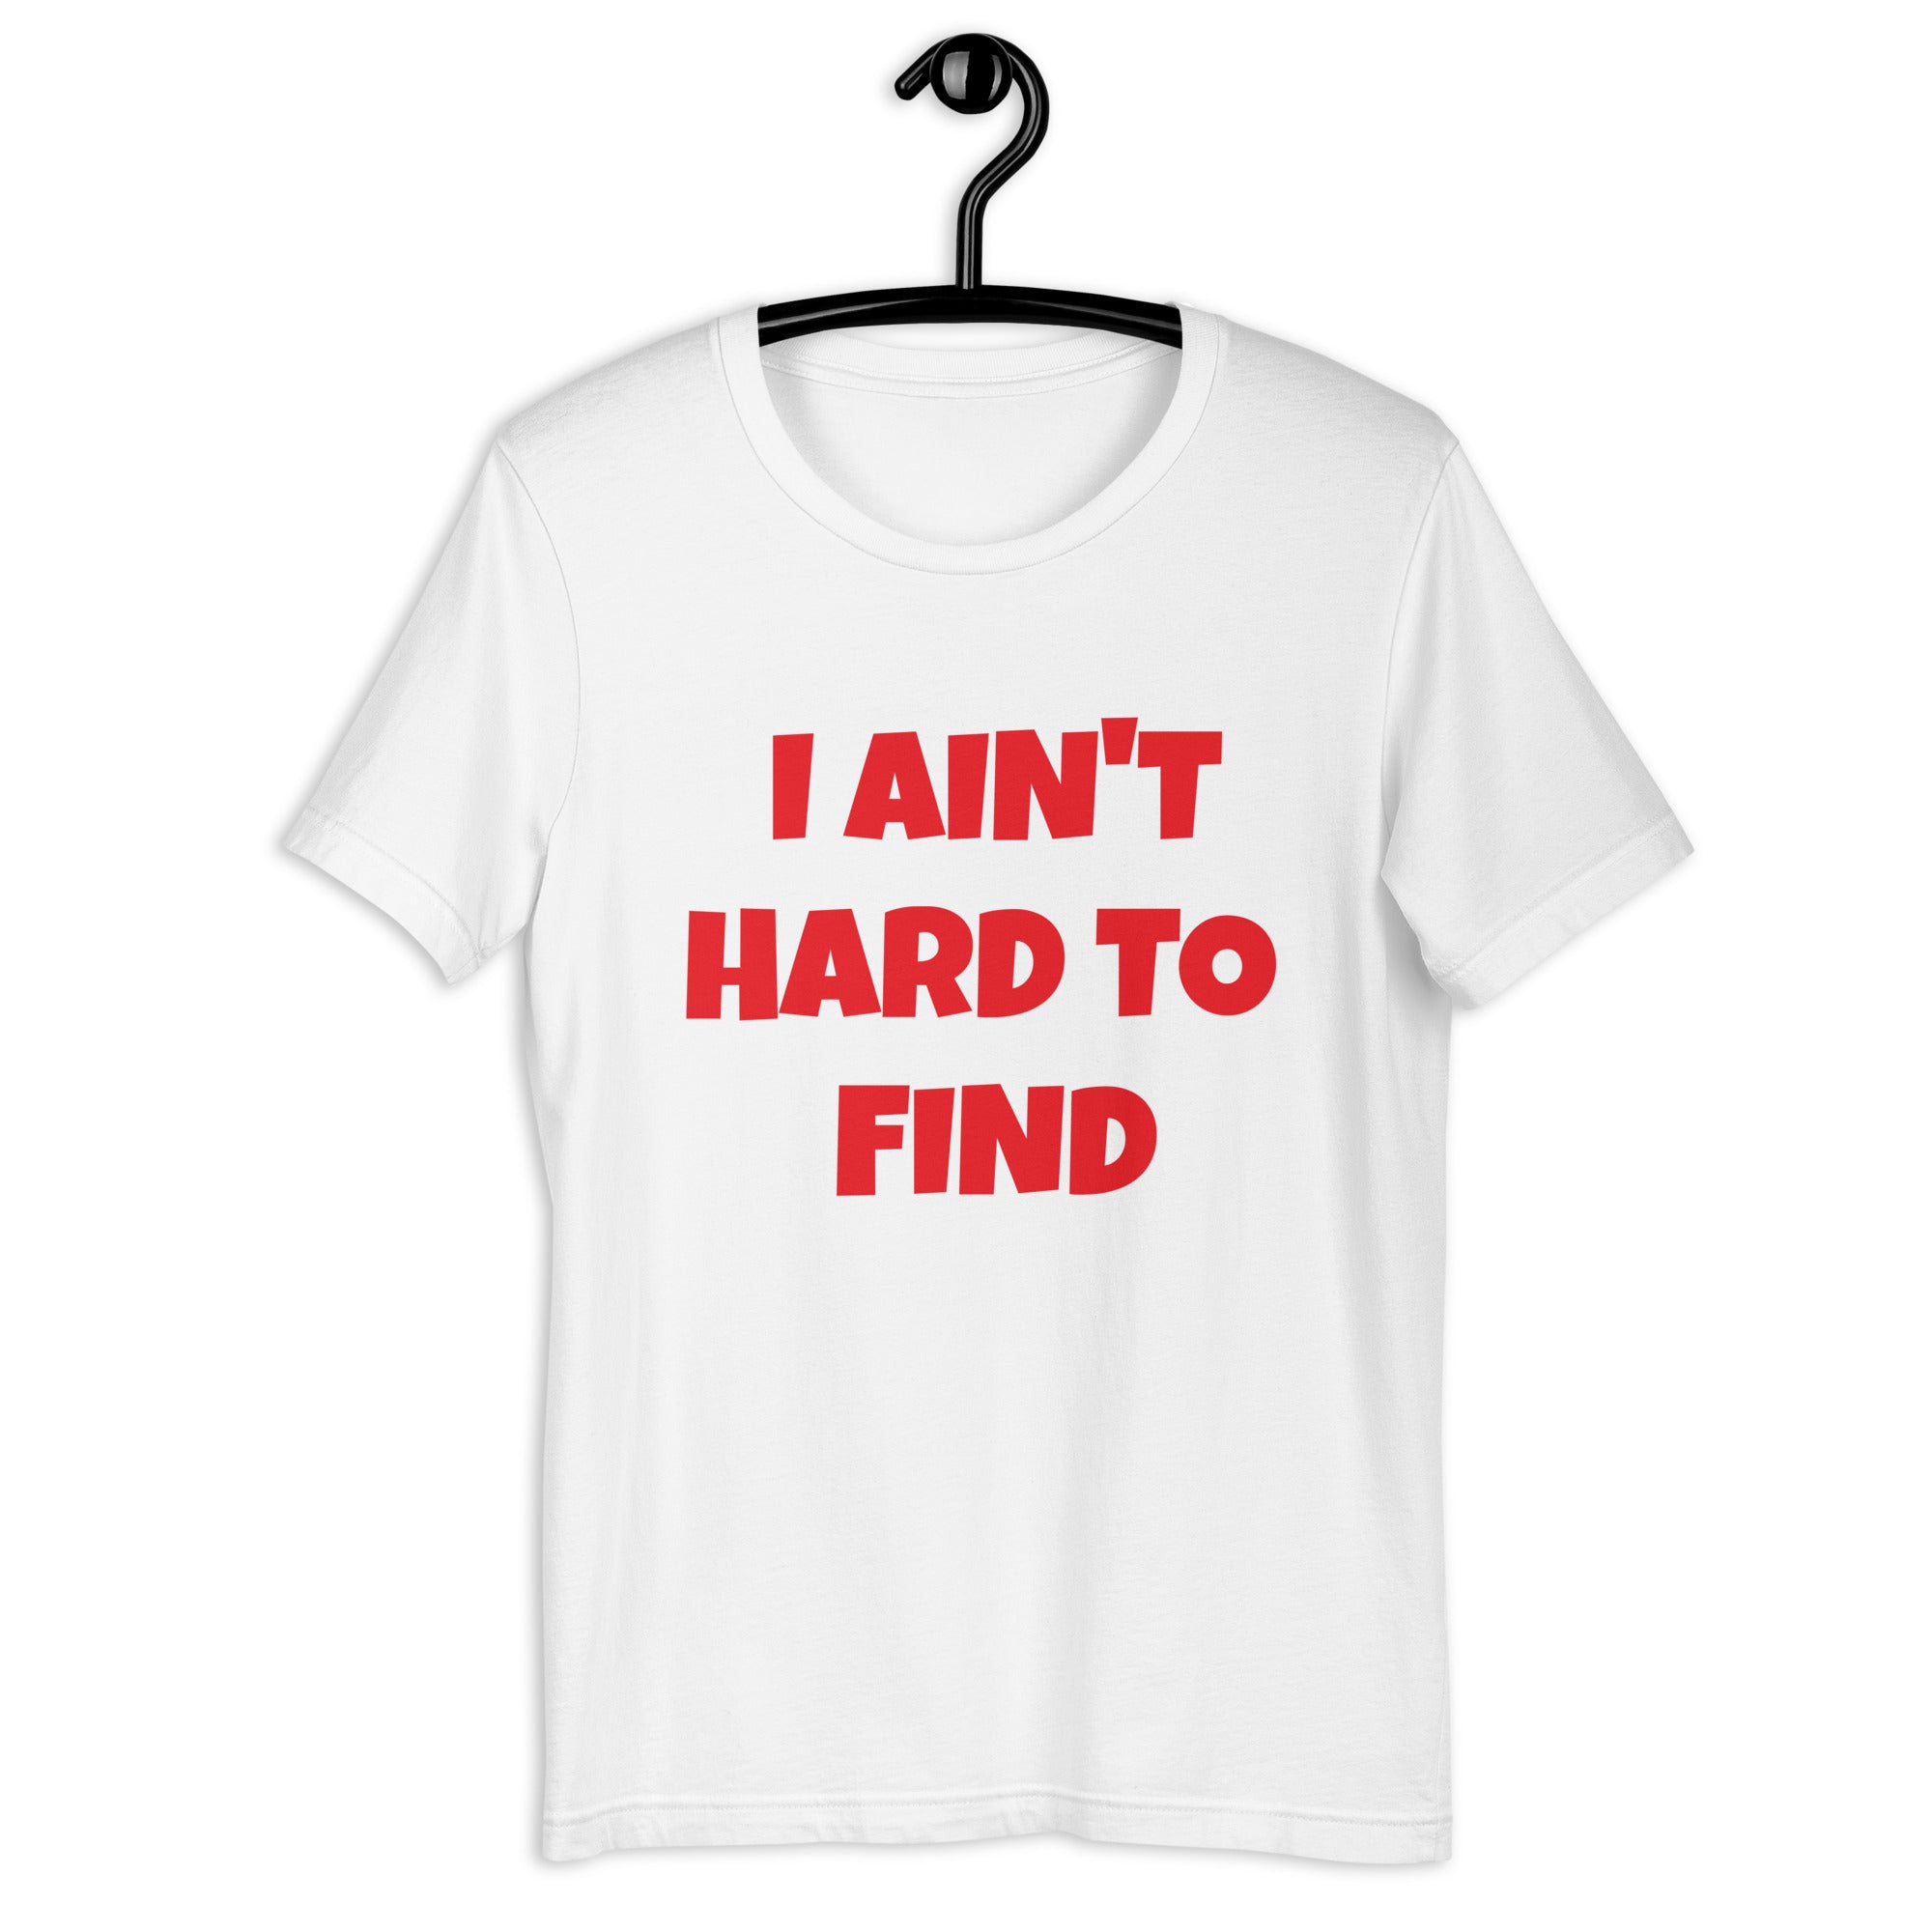 I Ain't Hard To Find Unisex t-shirt